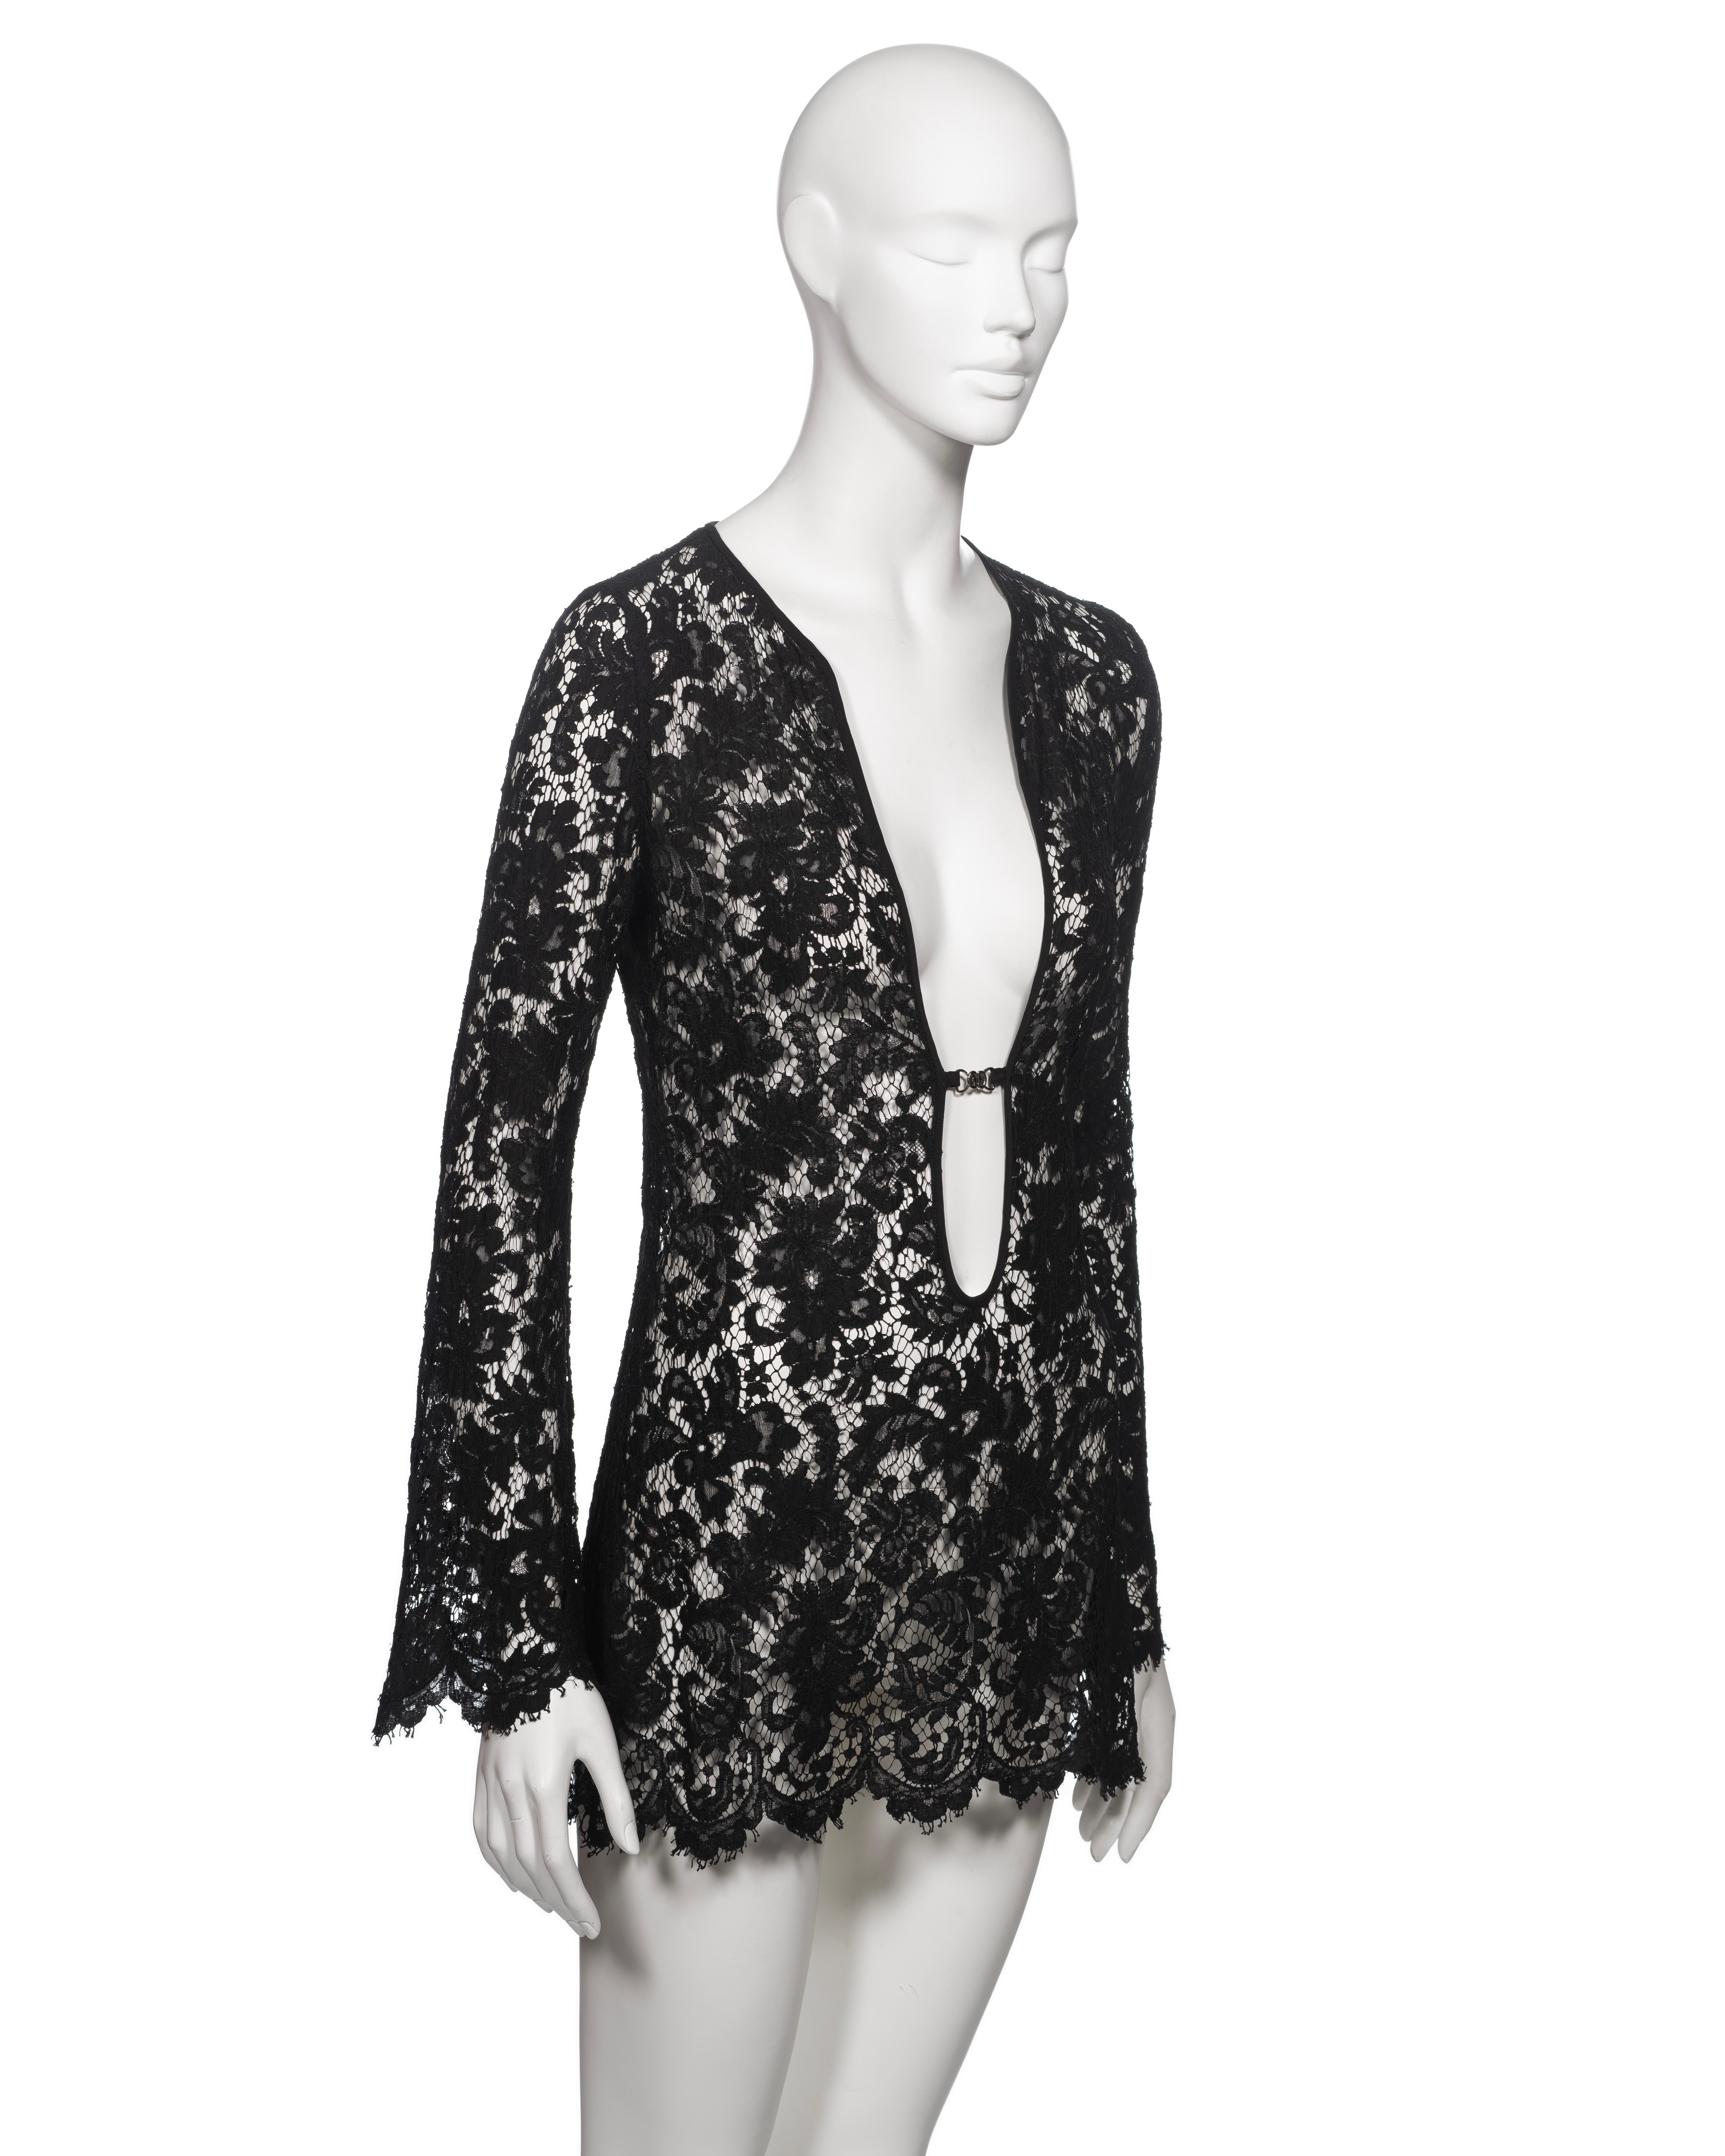 Gucci by Tom Ford Black Lace Long Sleeve Micro Mini Dress, SS 1996 For Sale 3